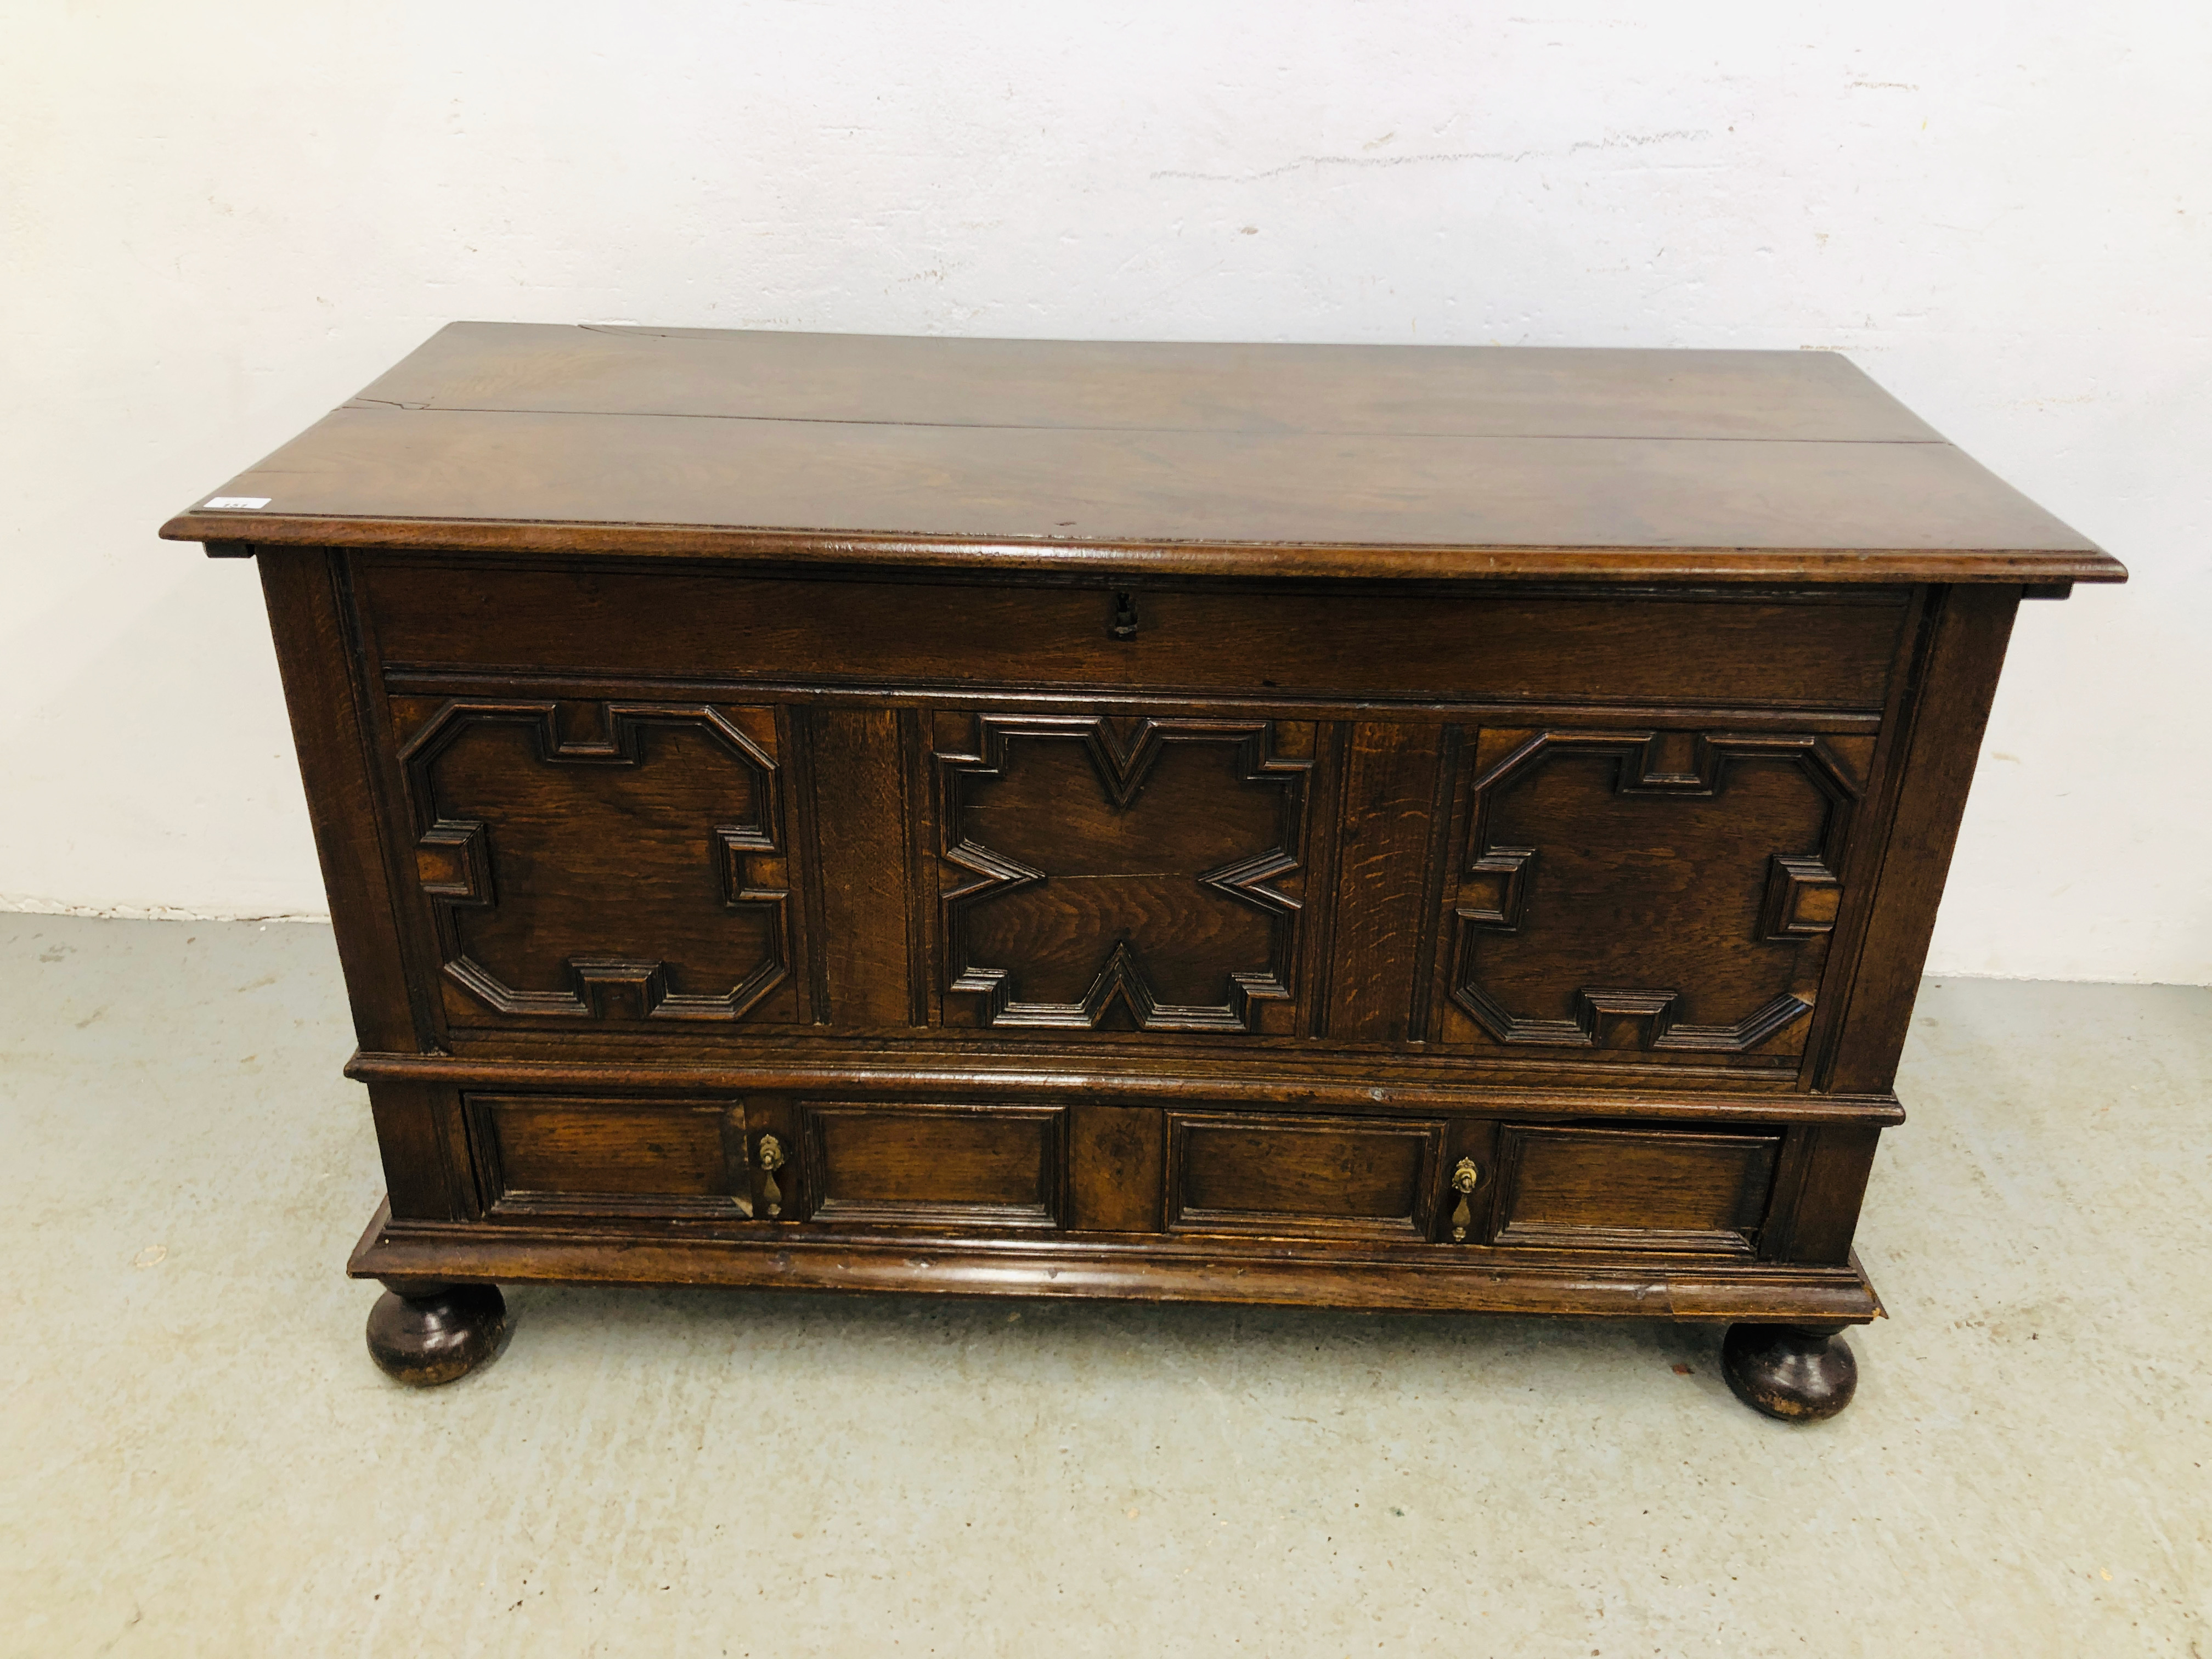 ANTIQUE OAK COFFER WITH TWO DRAWERS IN THE JACOBEAN STYLE - W 131CM. D 55CM. H 79CM.